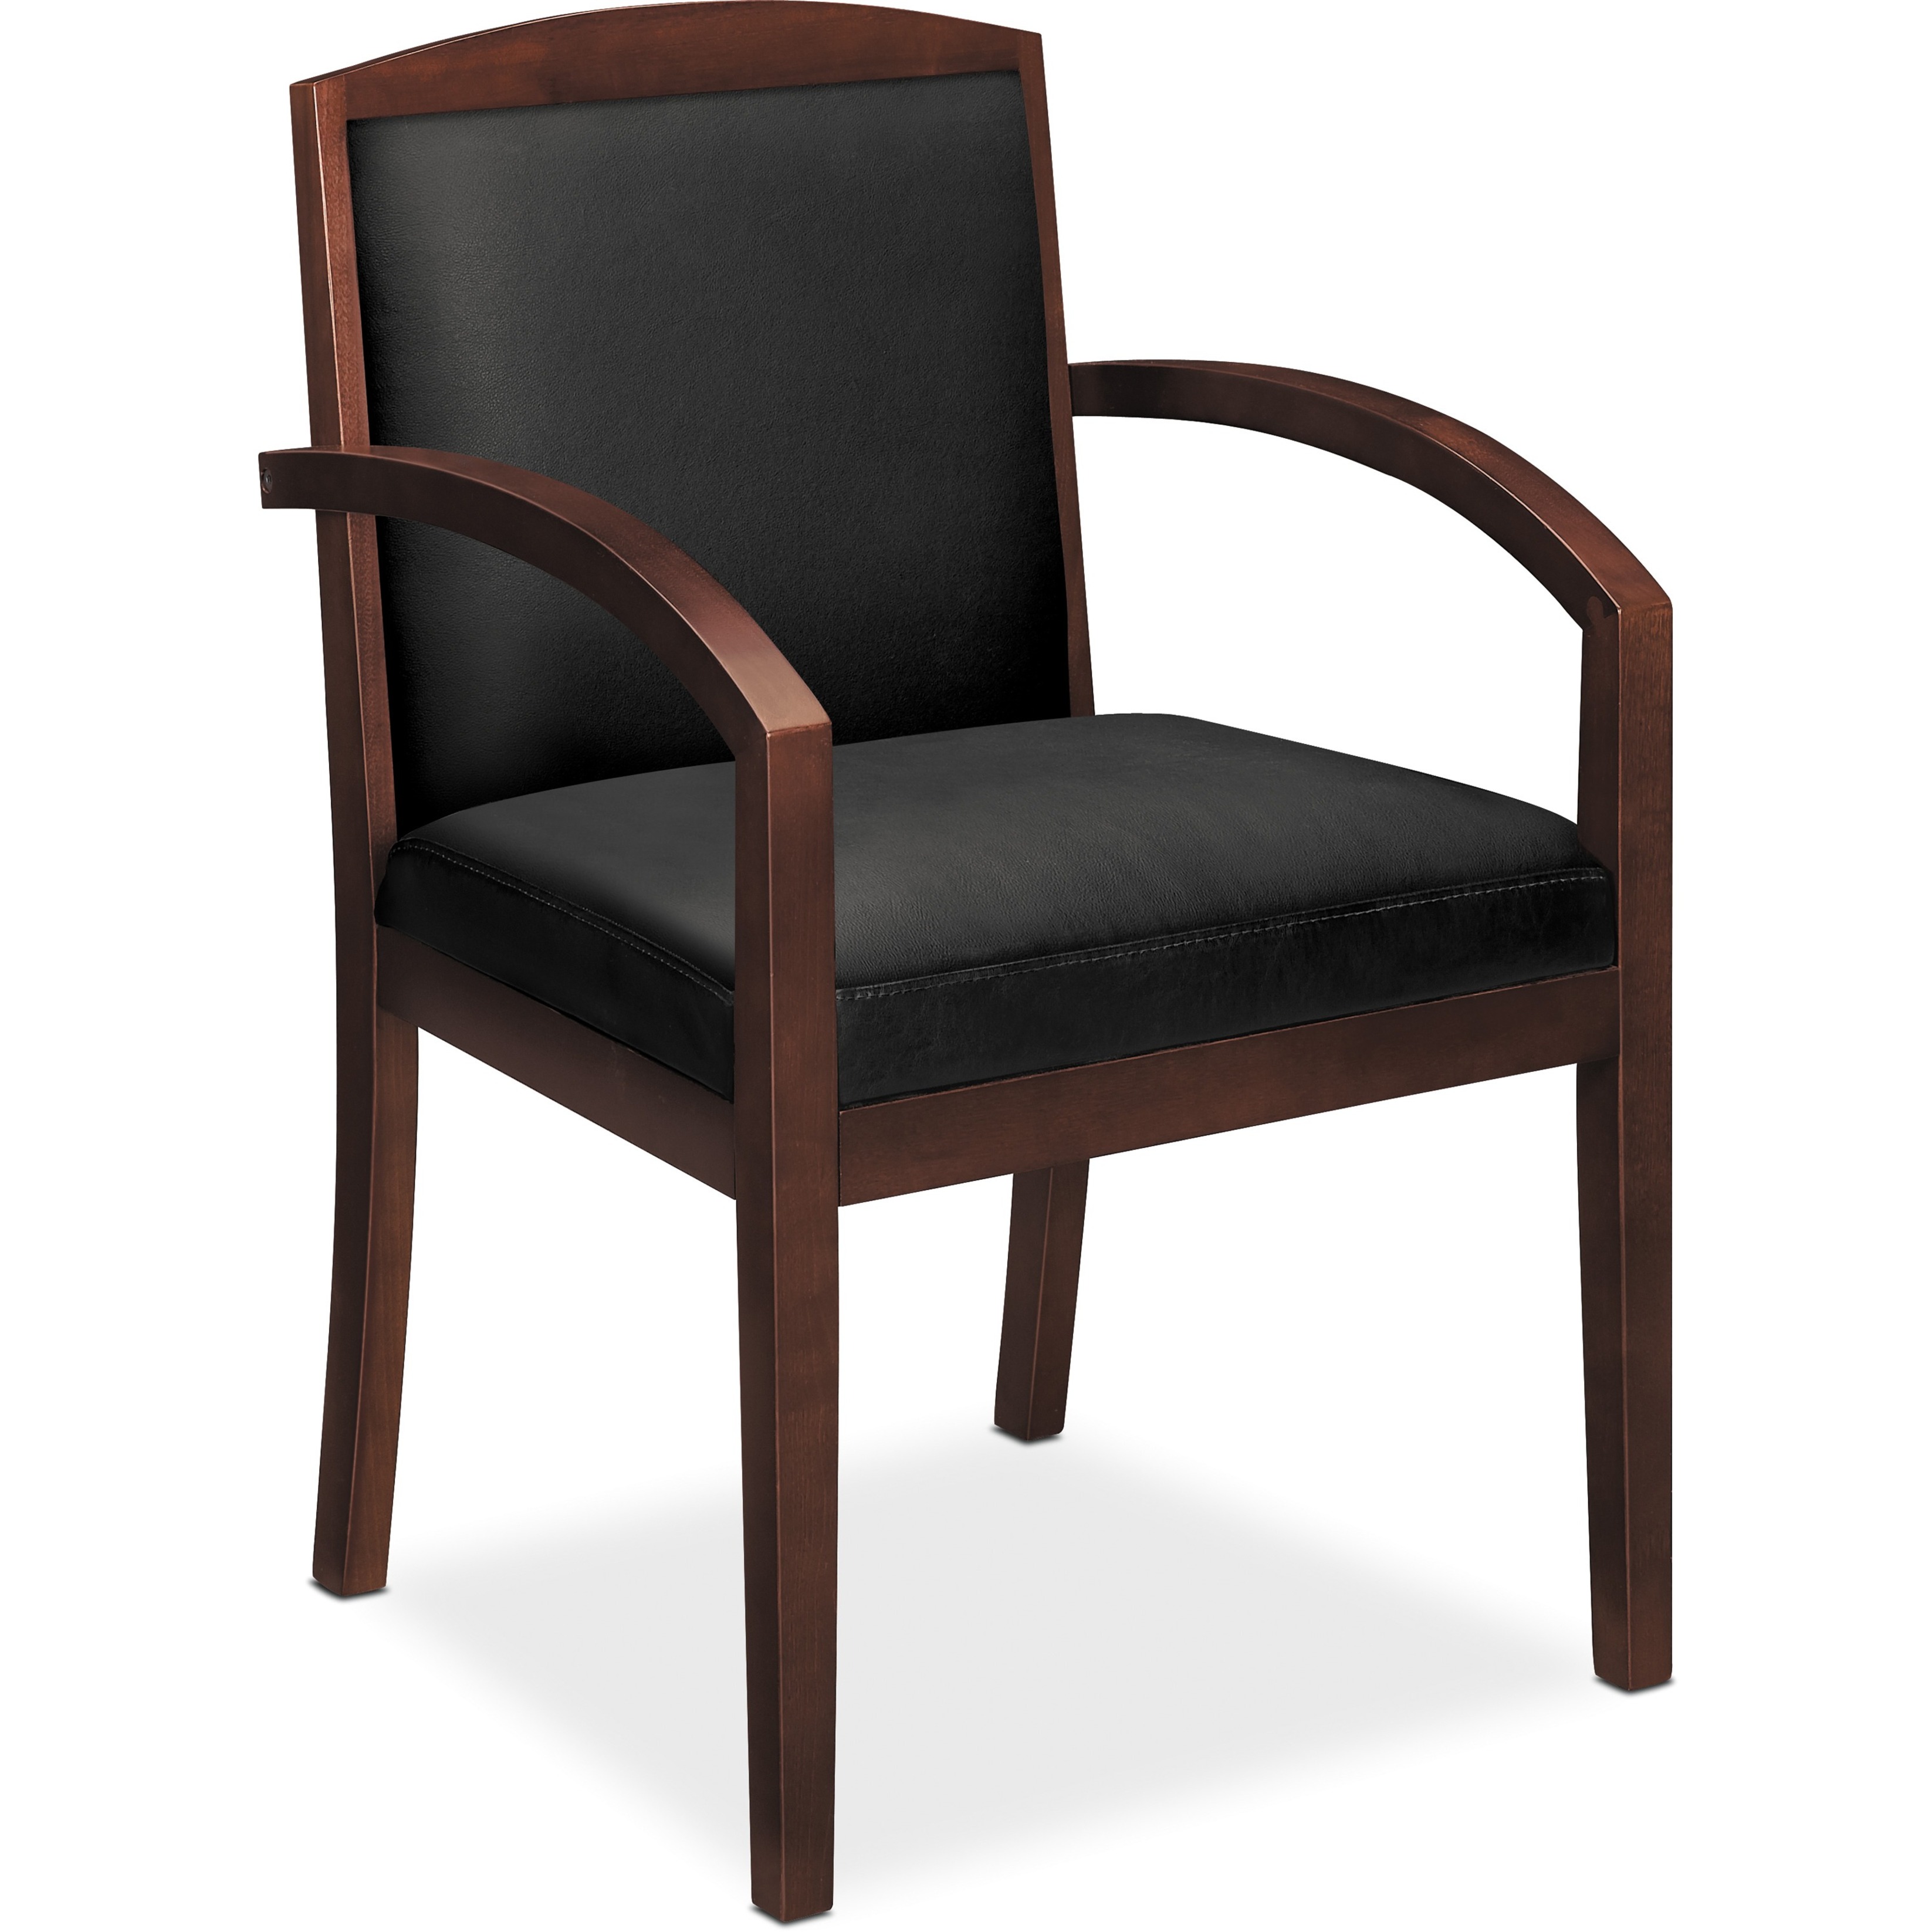 basyx VL850 Series Wood Guest Reception Waiting Room Chair, Black Leather Upholstery w/Mahogany Veneer - image 1 of 5